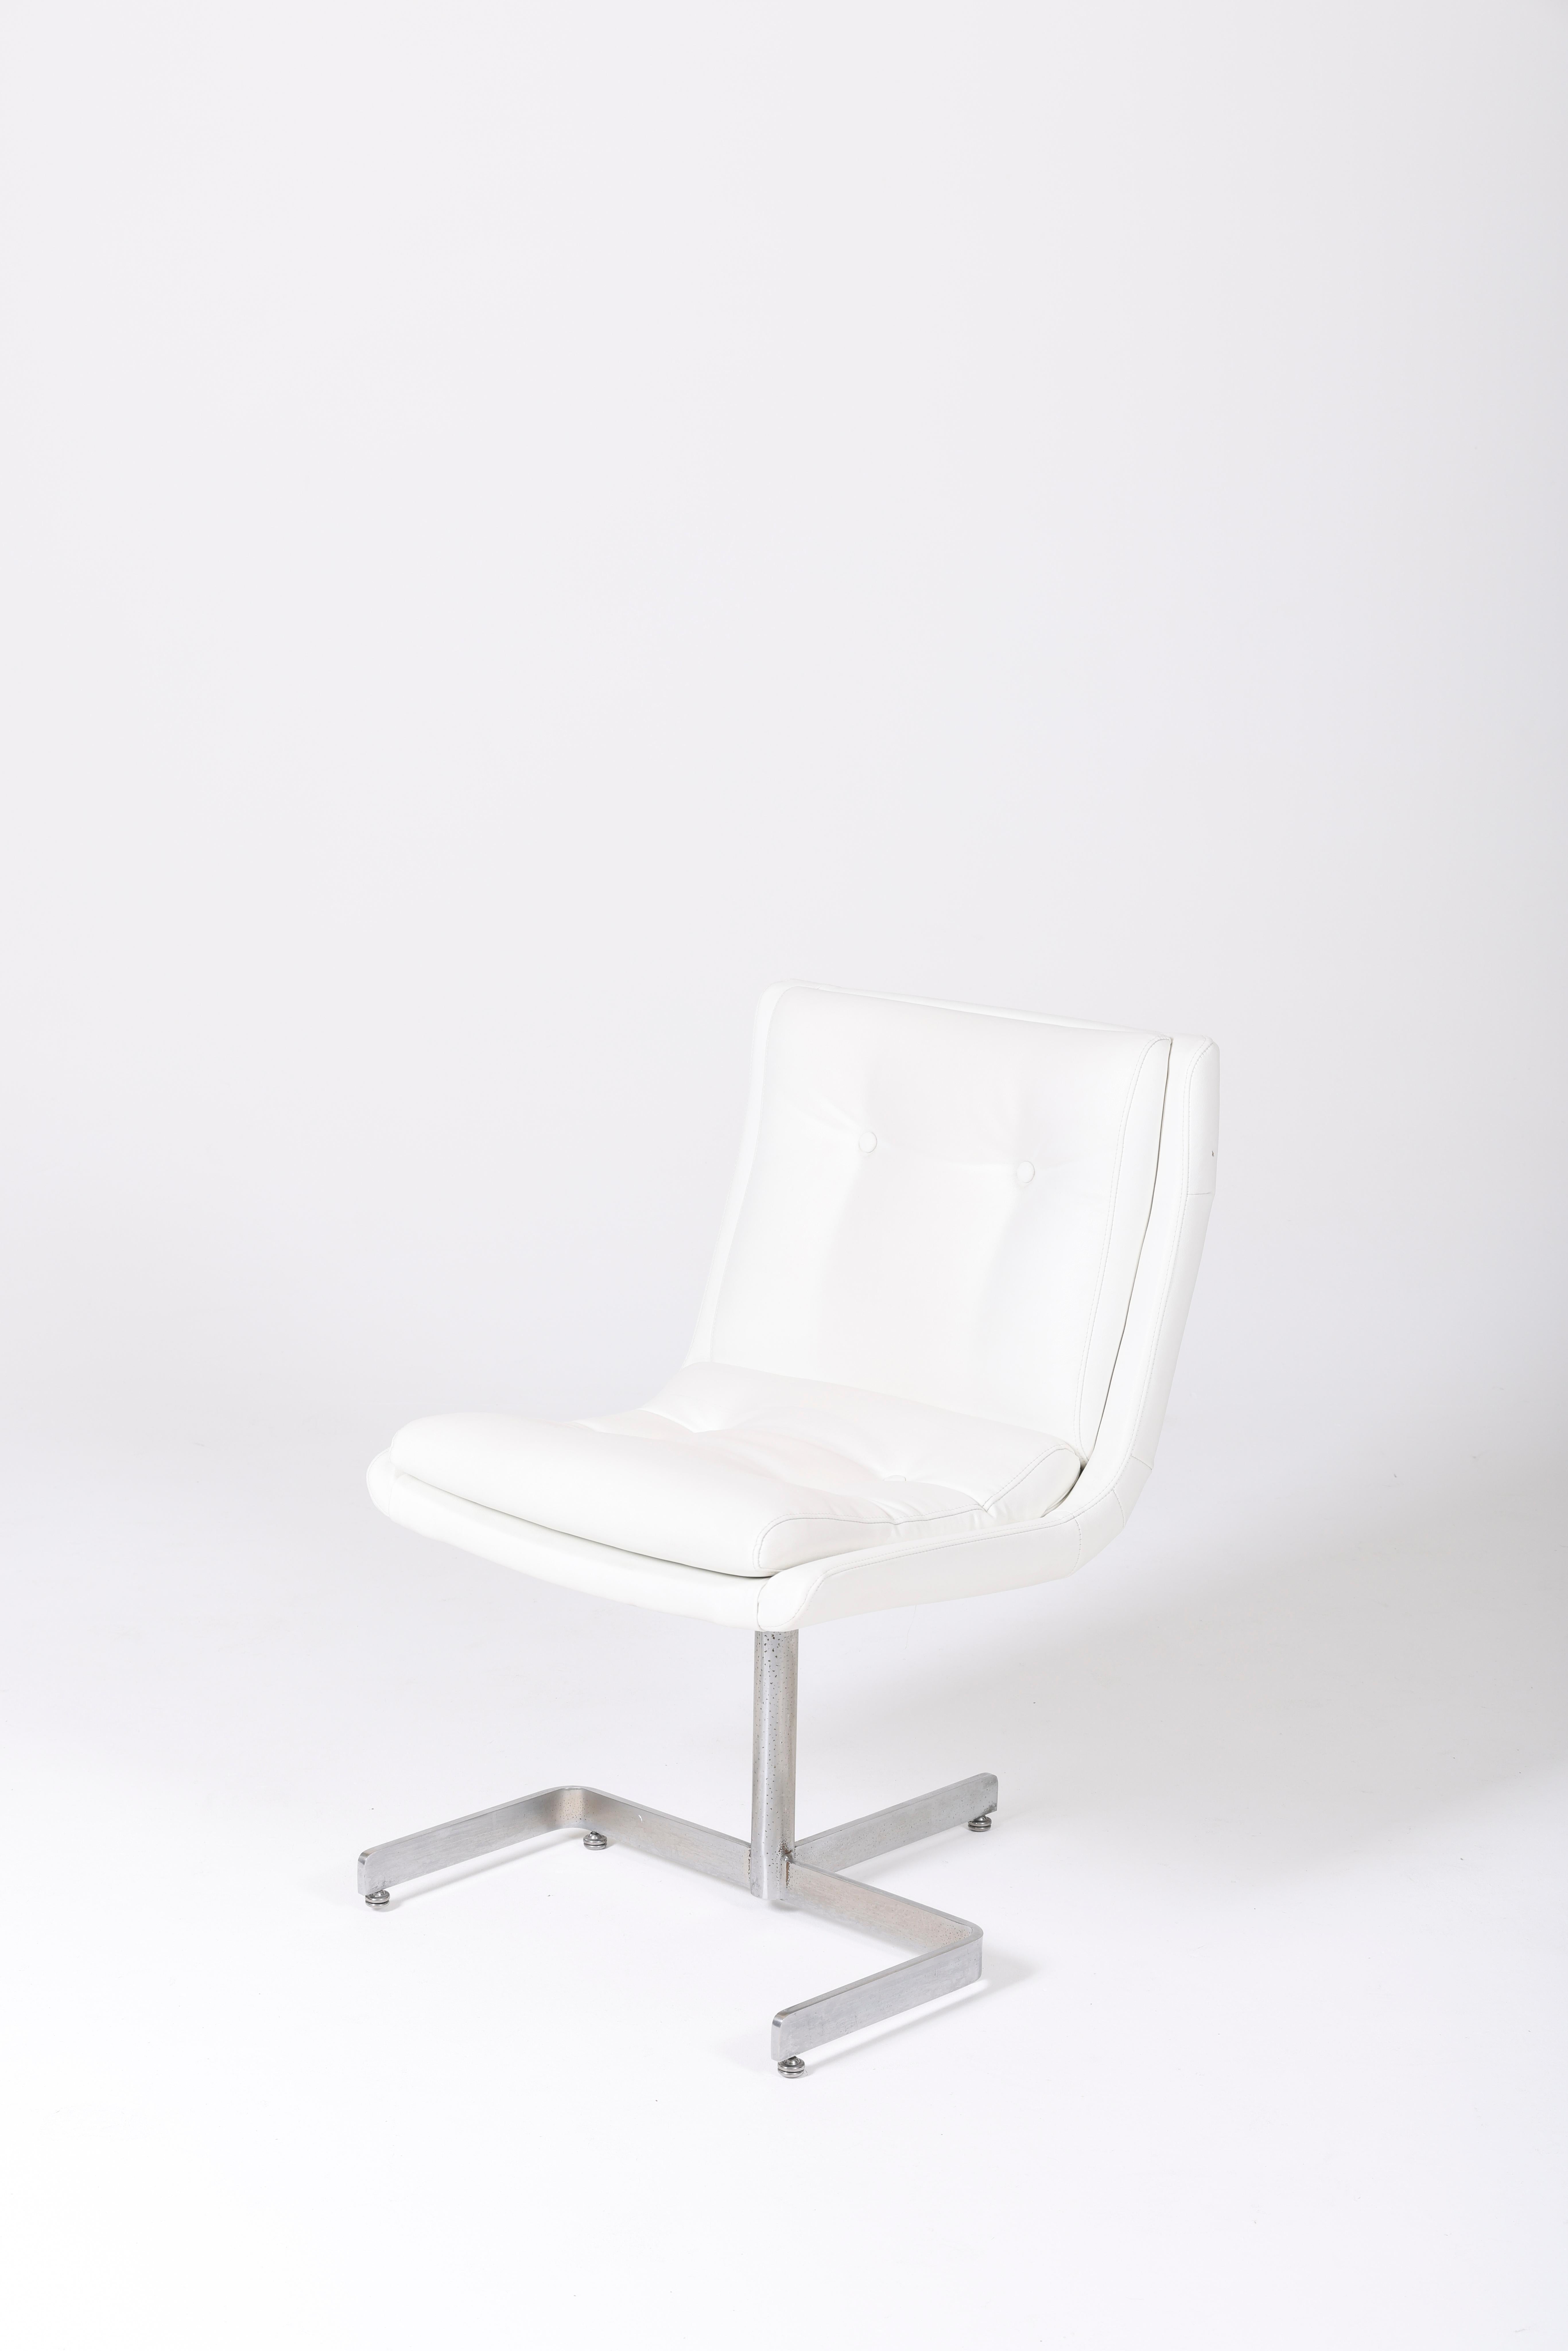 Designer Raphael Raffel chair from the 1970s. The seat and backrest are in white leather, and the base is made of metal. In very good condition.
LP976